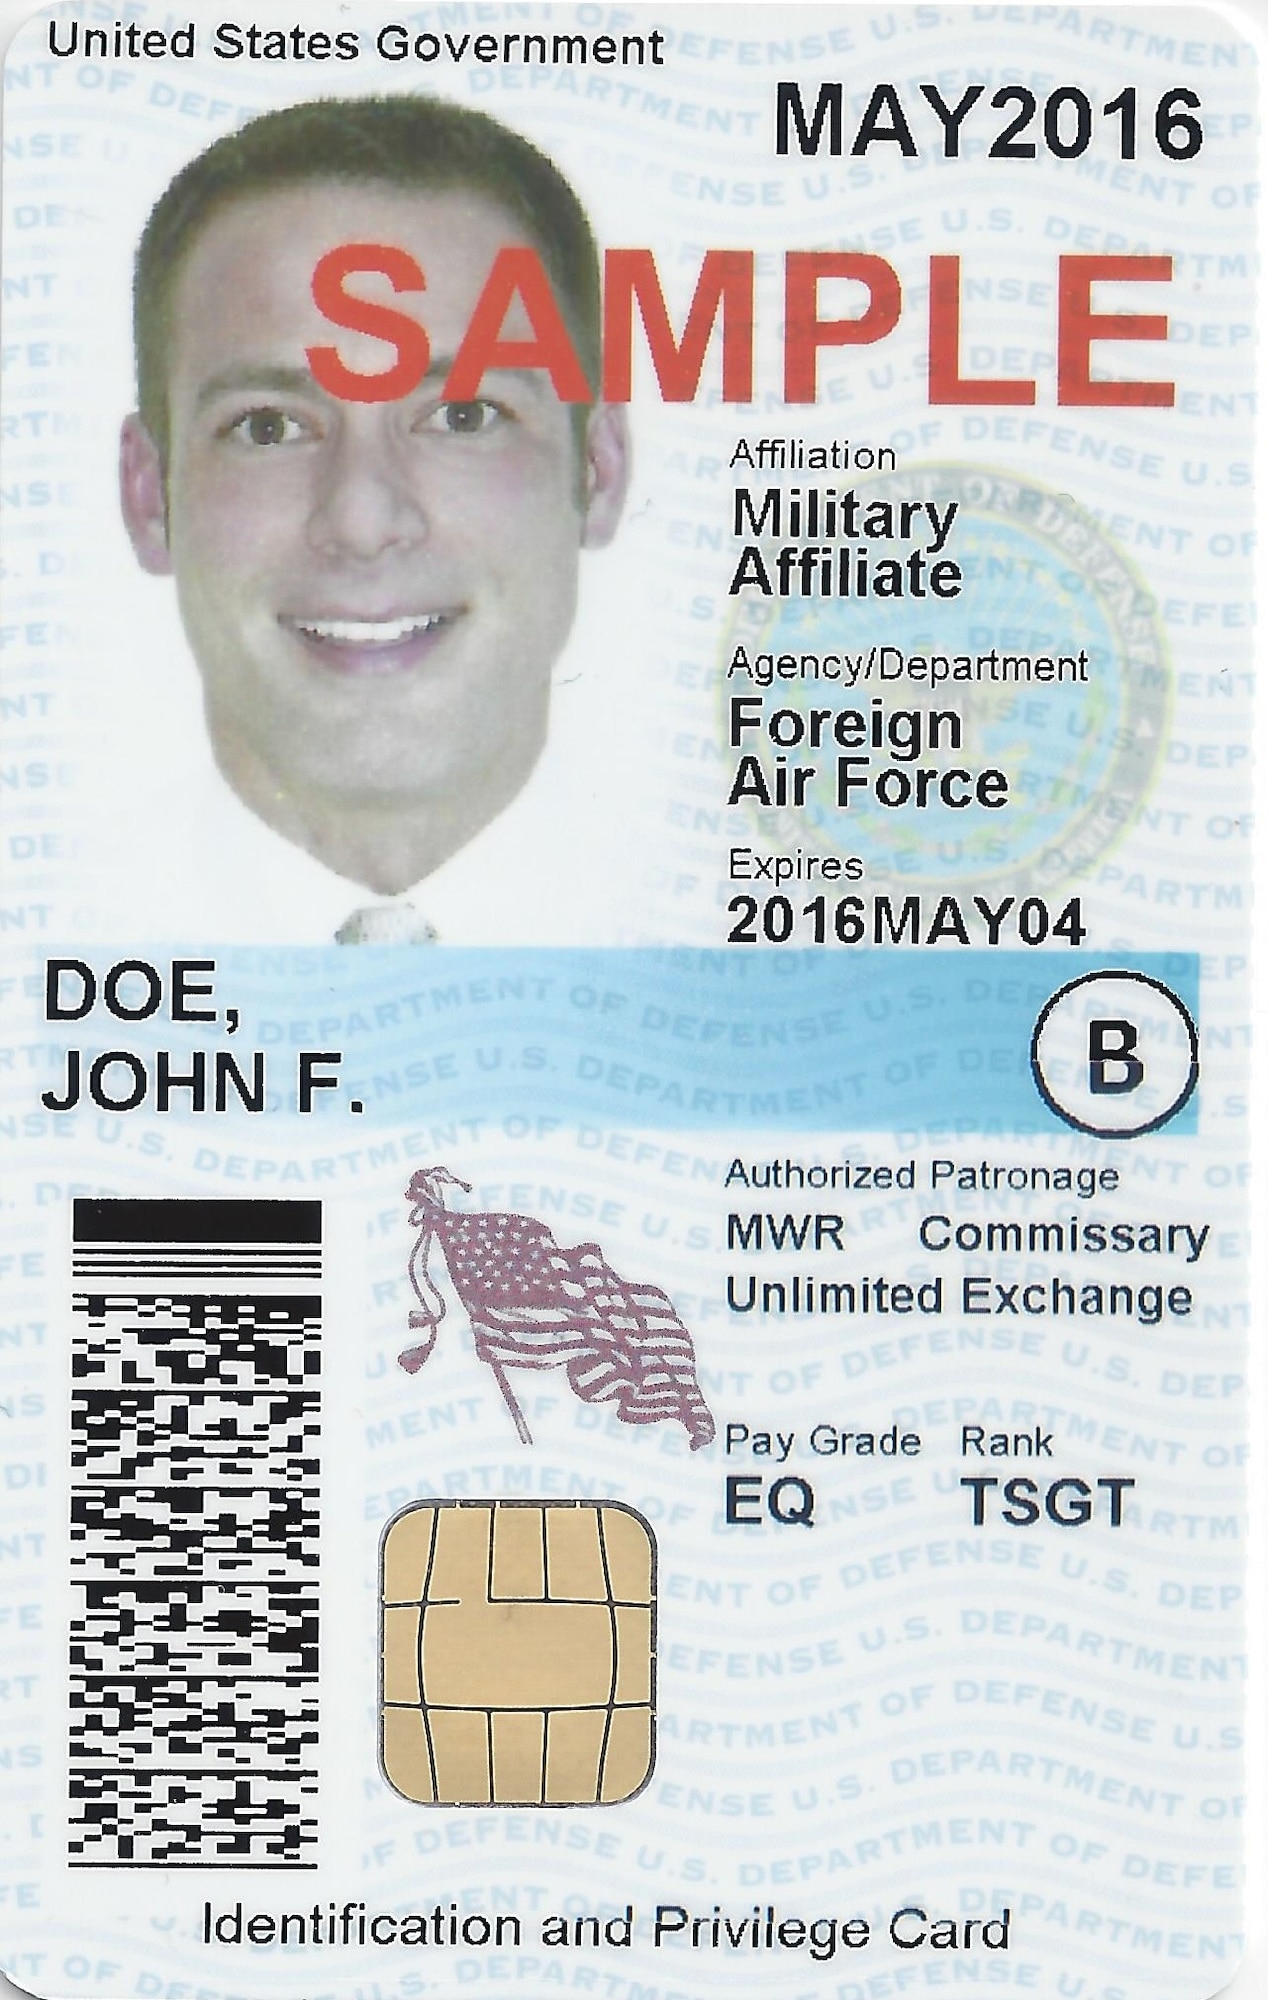 New Common Access Cards will aid security officials who are visually color impaired by adding encircled letters “W” for military and civilian employees, “G” for contractors and “B” for foreign nationals. (Courtesy image)  